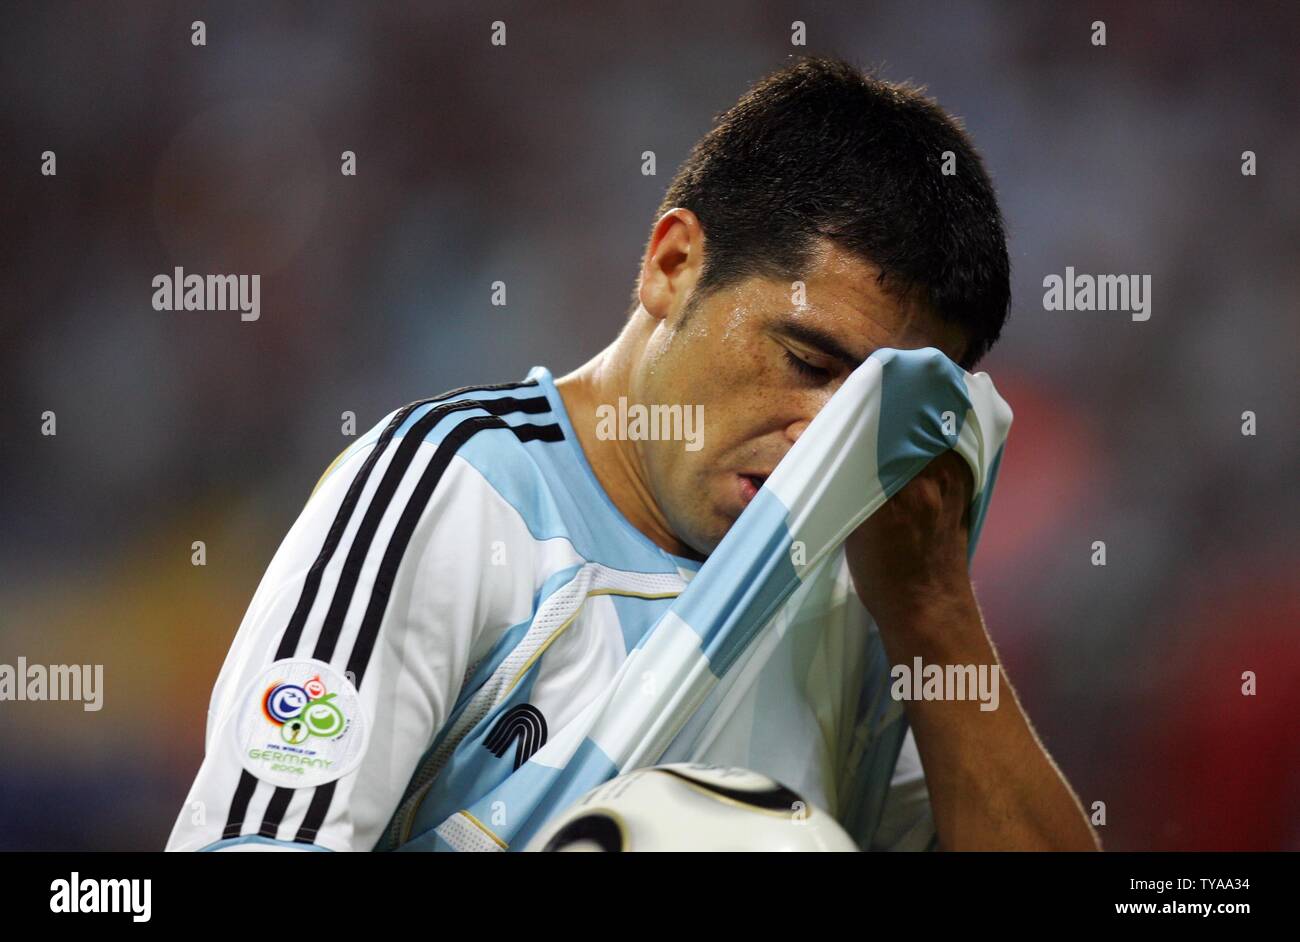 Argentina's Juan Riquelme during the last 16 knock-out stage of the FIFA World Cup 2006 at the Zentralstadion in Leipzig, Germany on June 24, 2006. Argentina needed extra-time and a wonder strike from Maxi Rodriguez to give them a 2-1 victory over Mexico and a place in the quarter-finals.   (UPI Photo/Christian Brunskill) Stock Photo